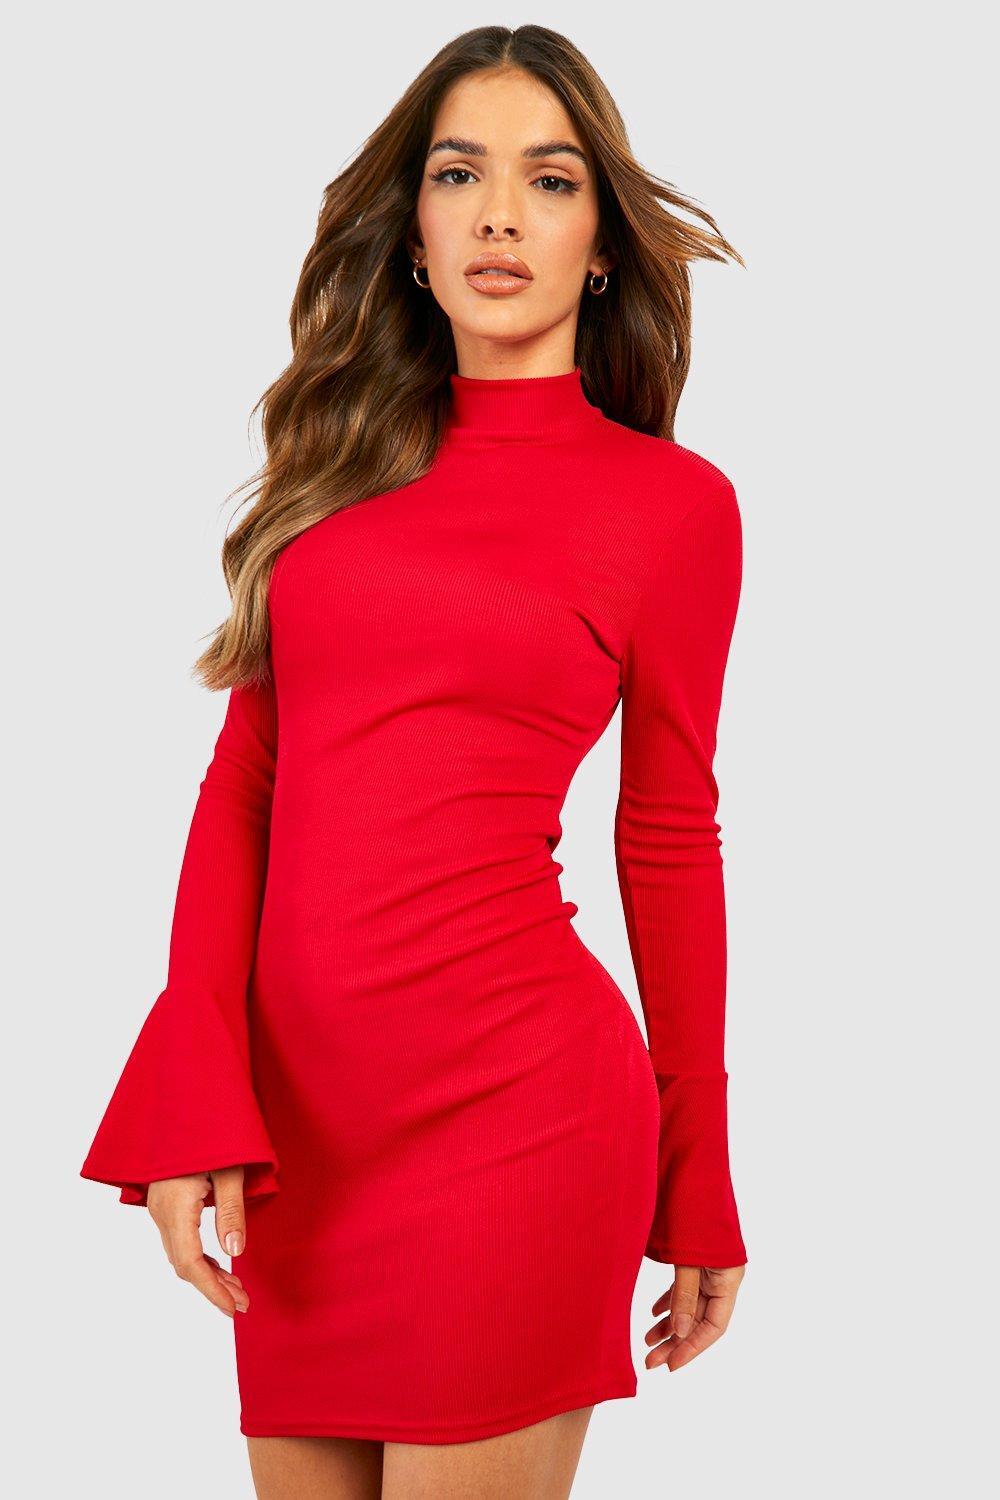 JESSICA HIGH NECK RED FULL SLEEVES BODYCON DRESS – LA CHIC PICK